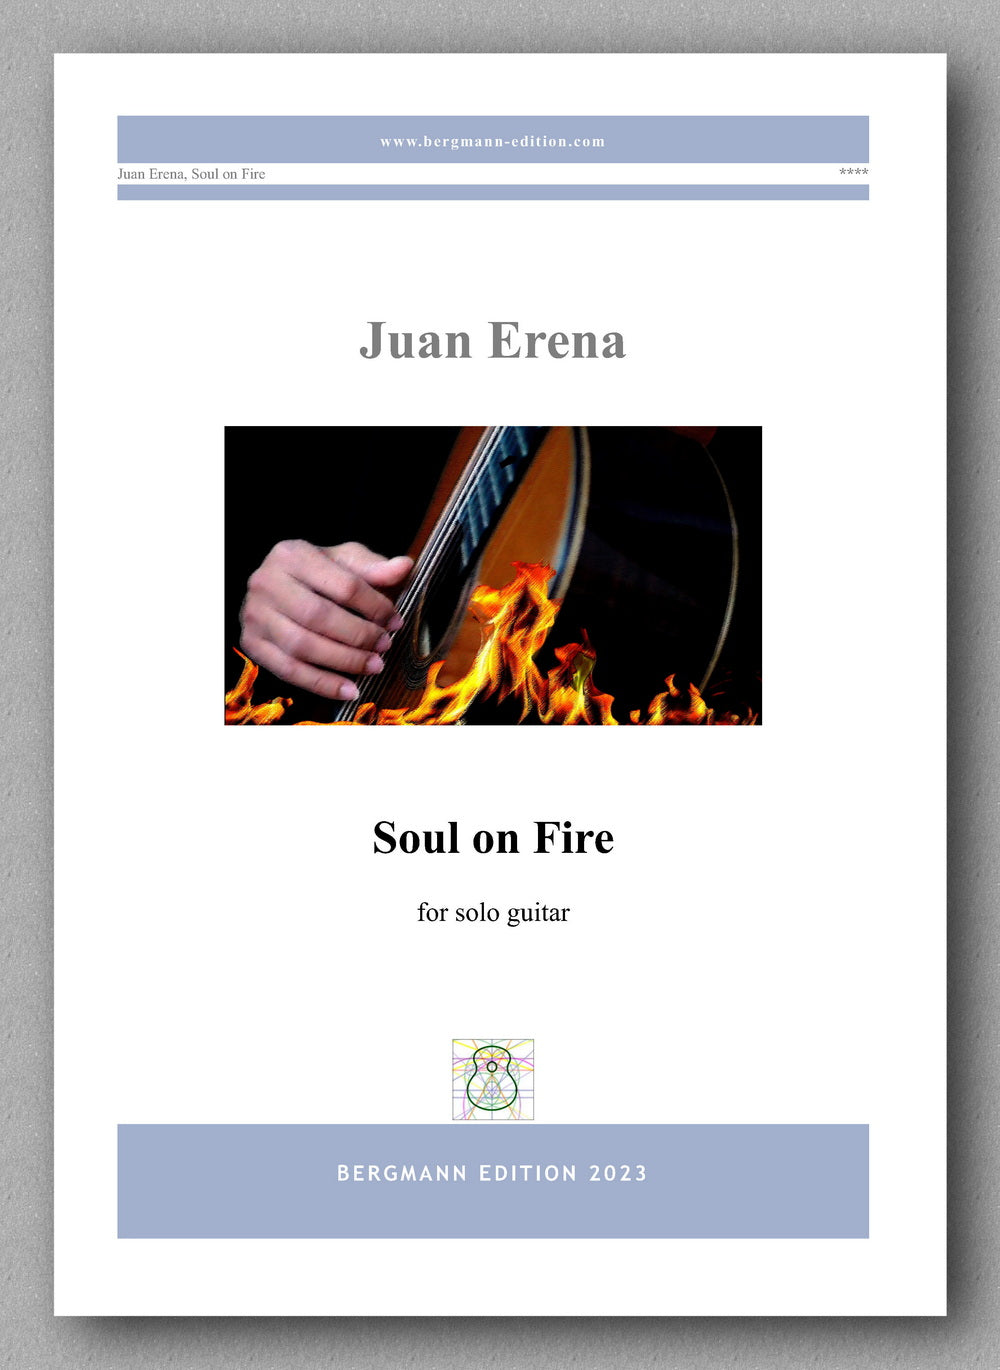 Juan Erena, Soul on Fire - preview of the cover